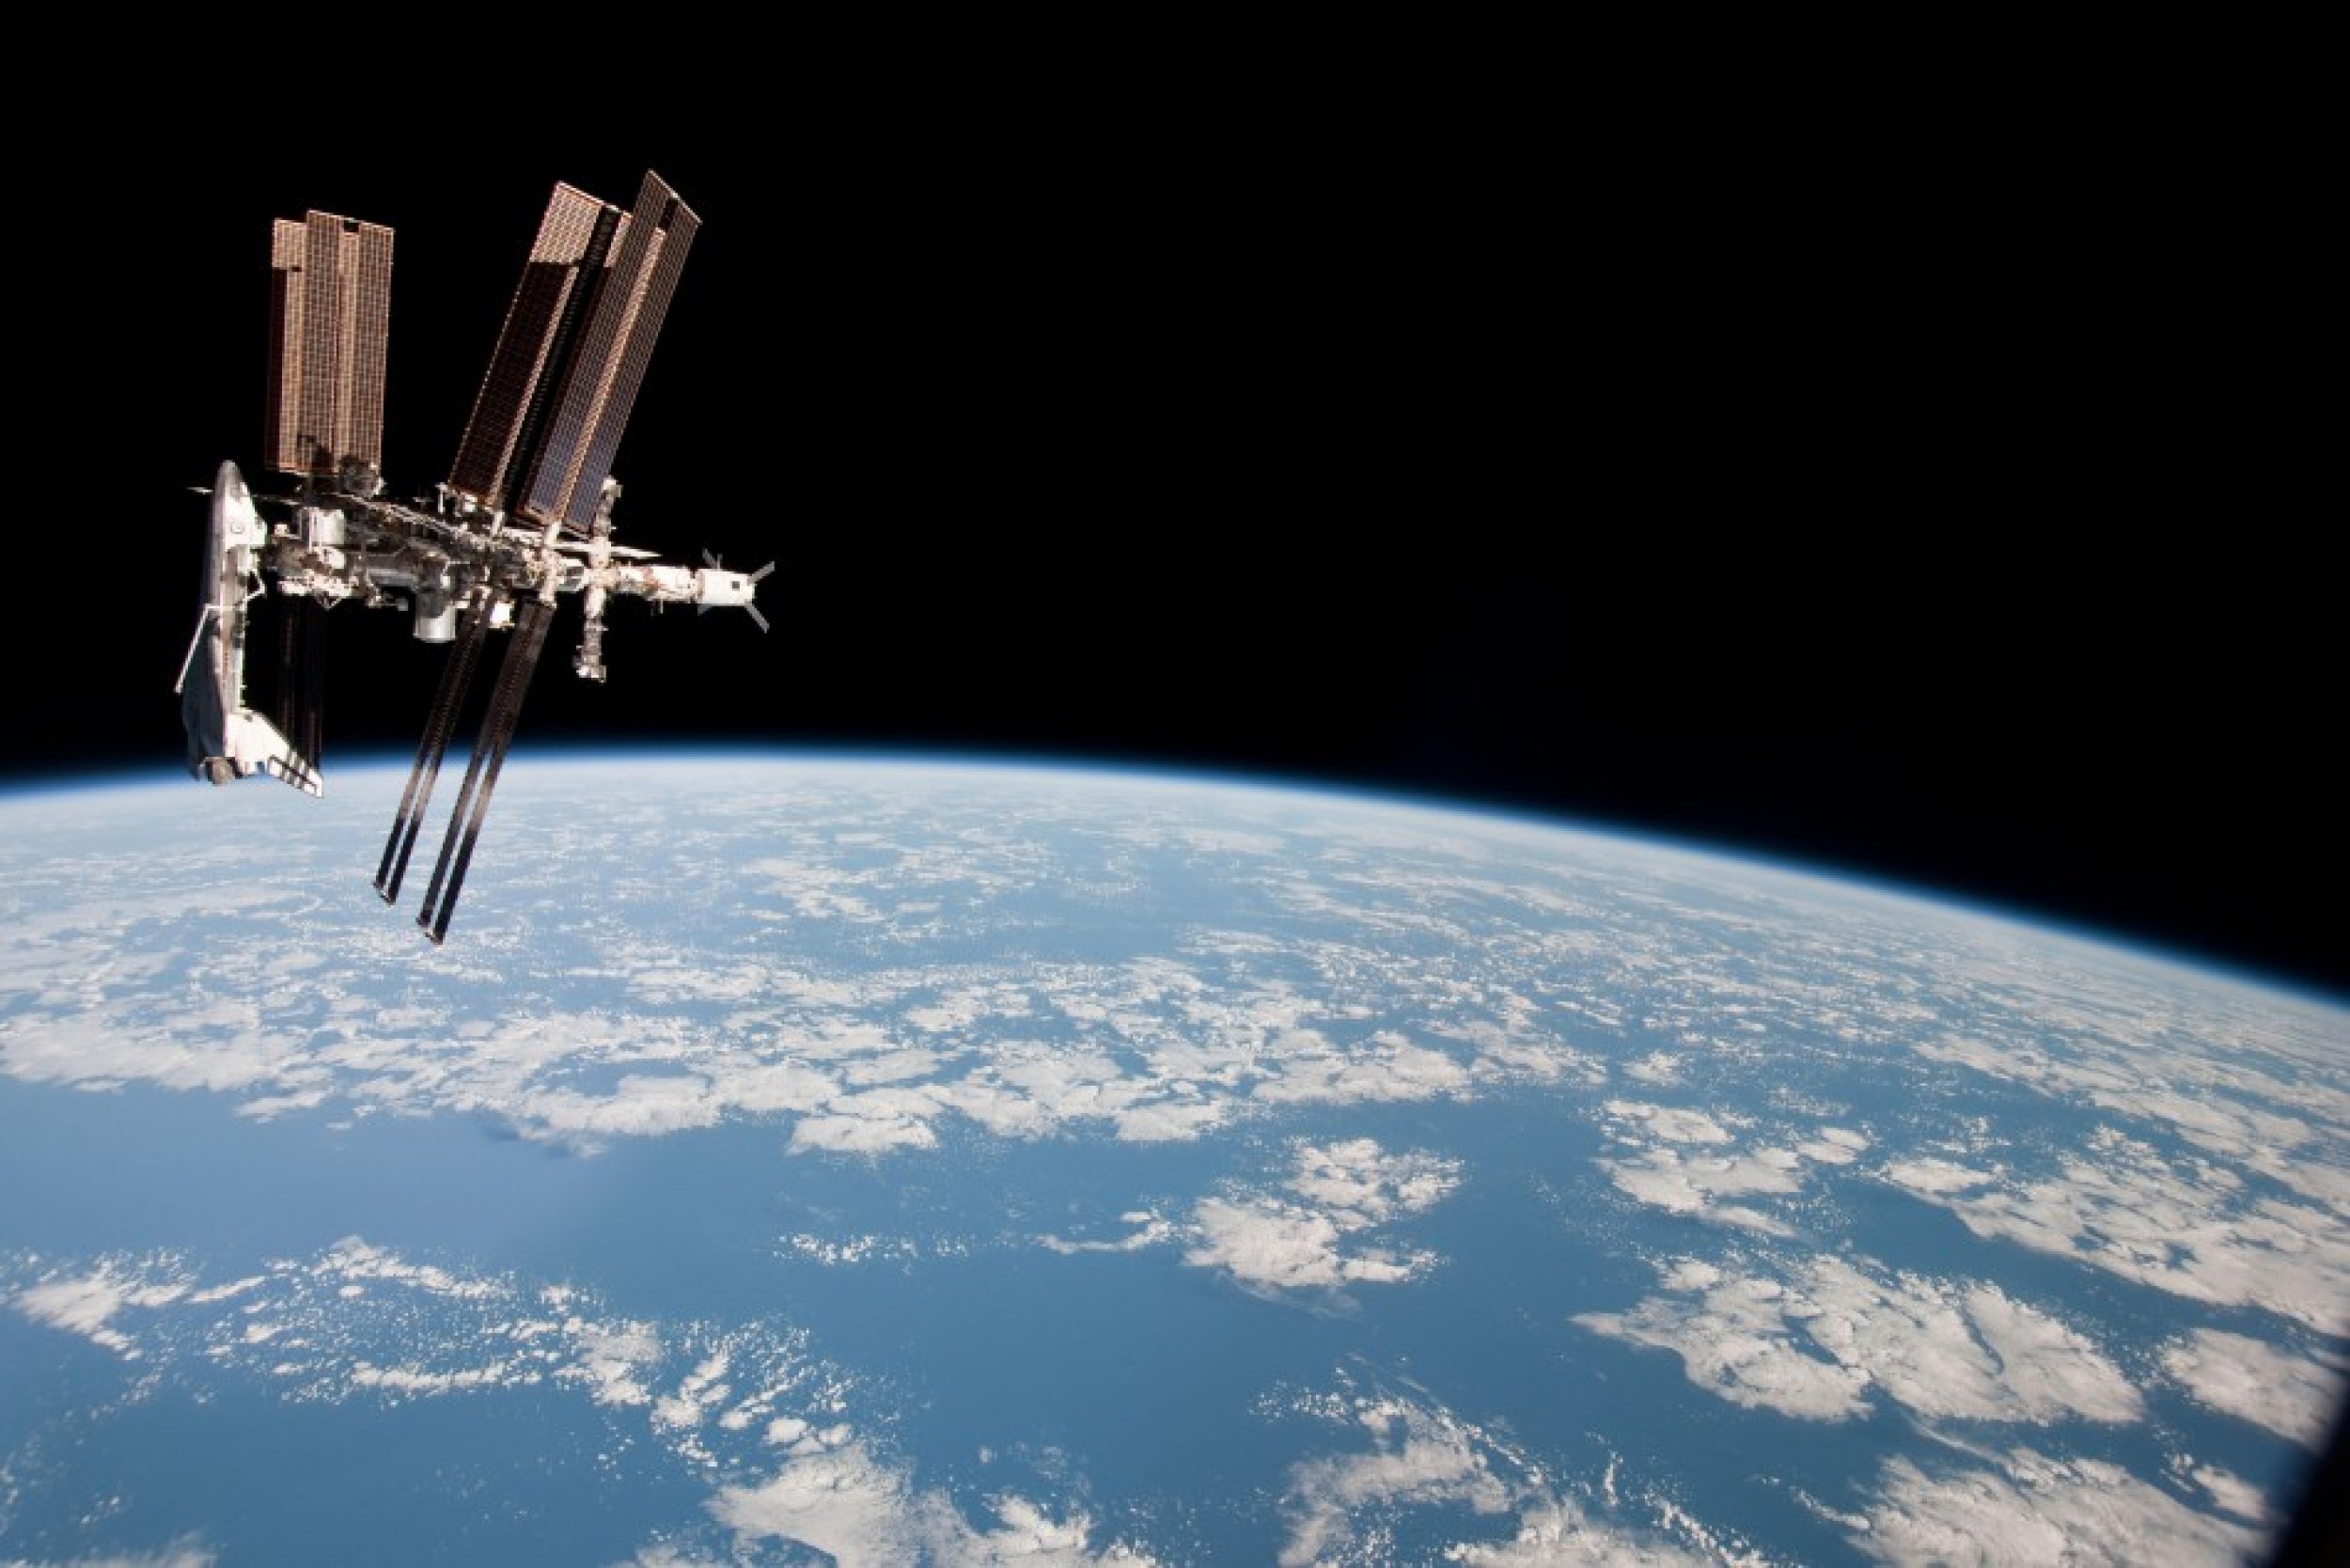 The Space Shuttle Endeavour docked at the International Space Station.